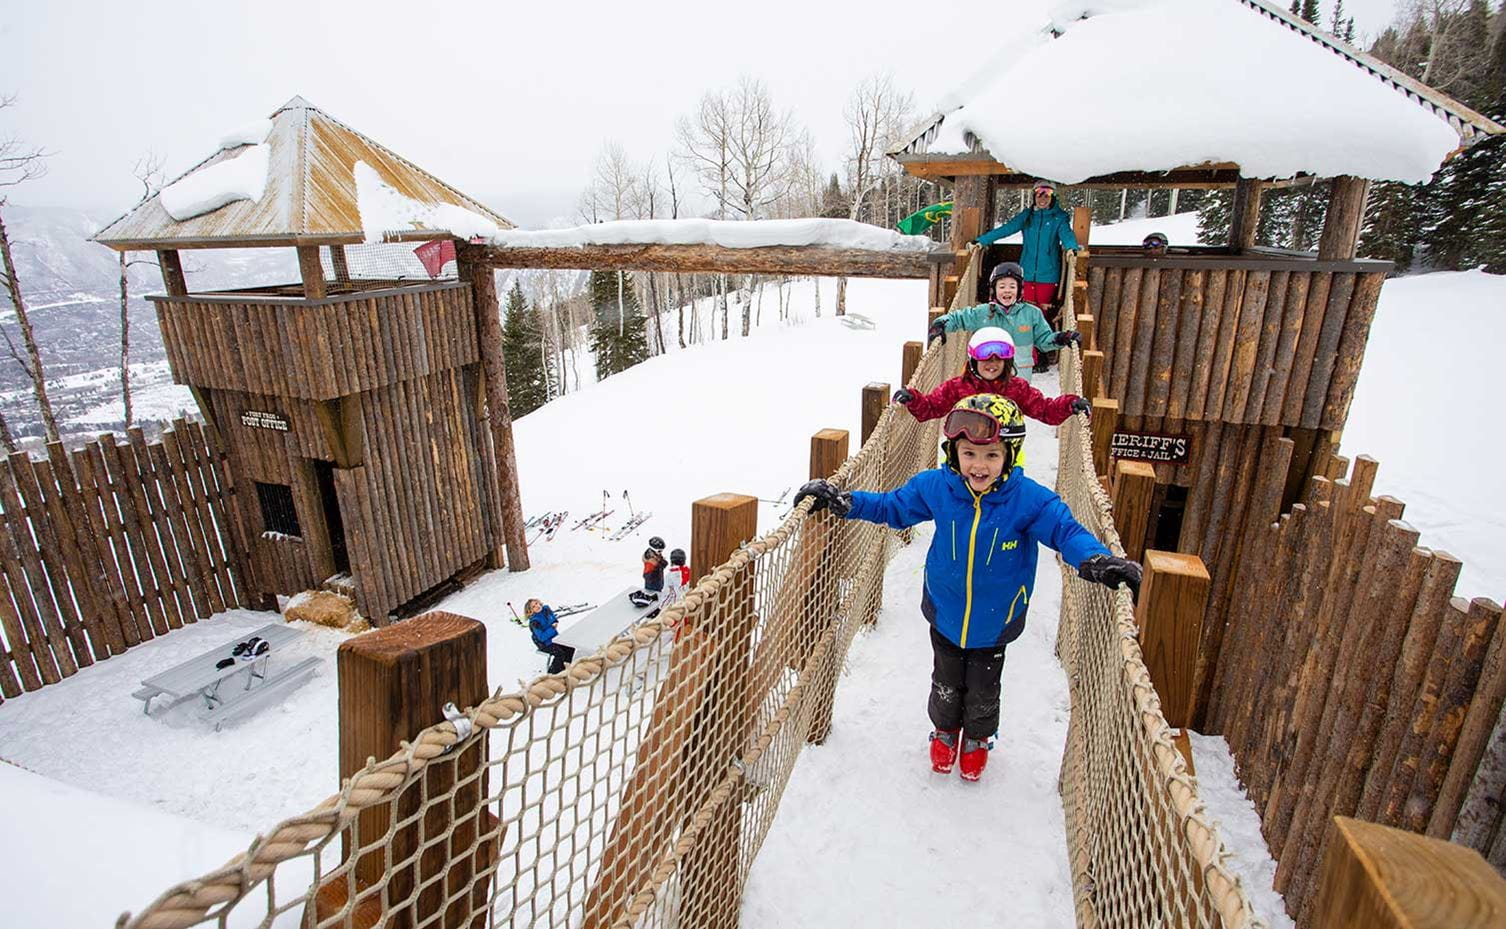 Kids Programs and Child Care at Aspen Snowmass